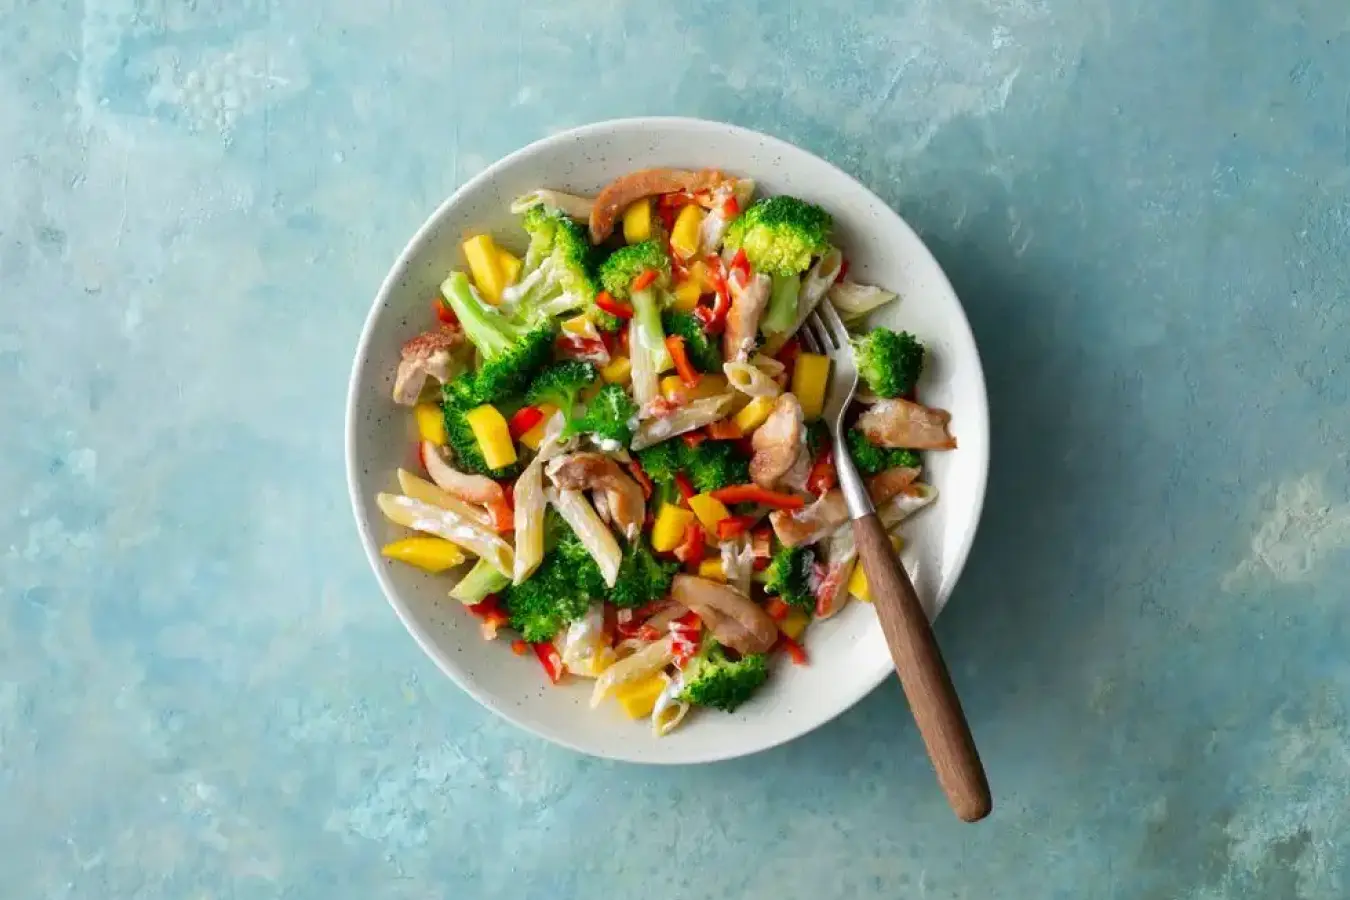 Pasta salad with mango, chicken breast, broccoli and bell pepper